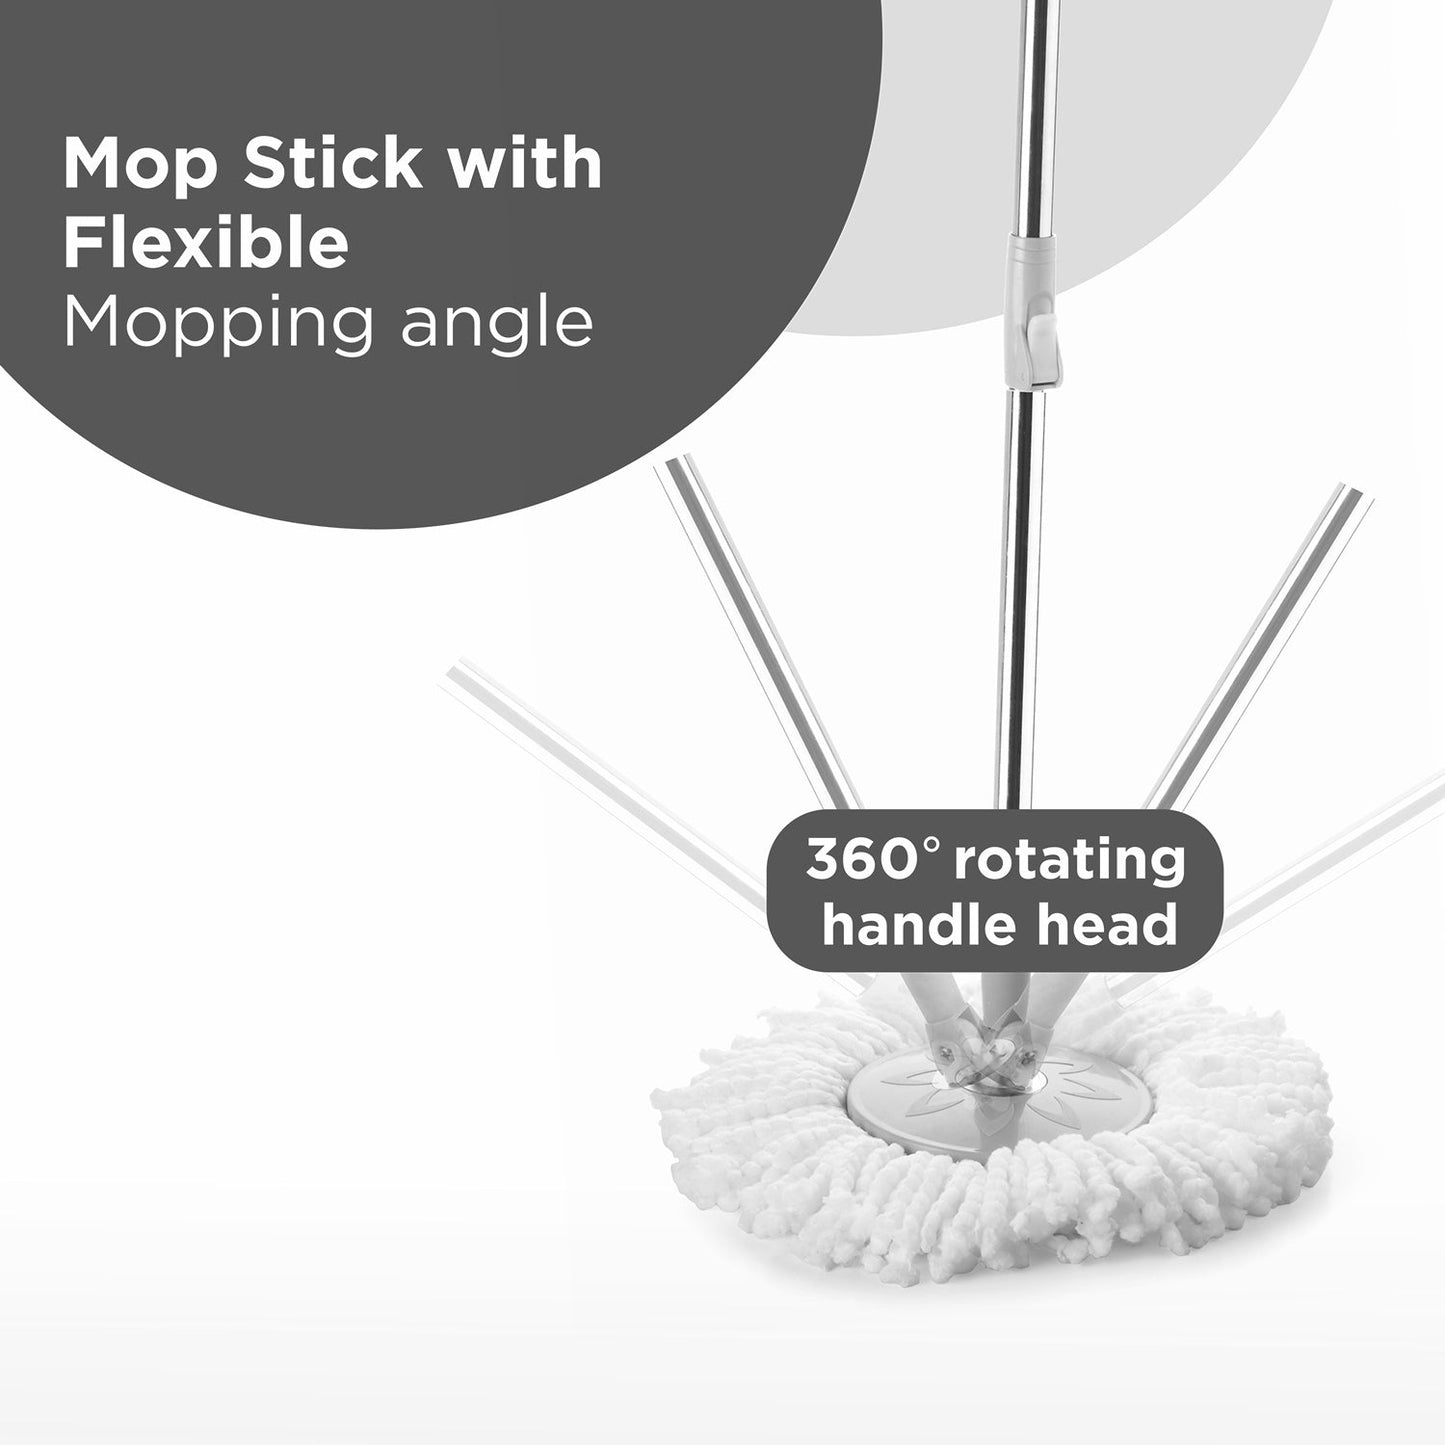 1166 Spin Mop with Big Wheels and Stainless Steel Wringer, Bucket Floor Cleaning High Quality Bucket DeoDap